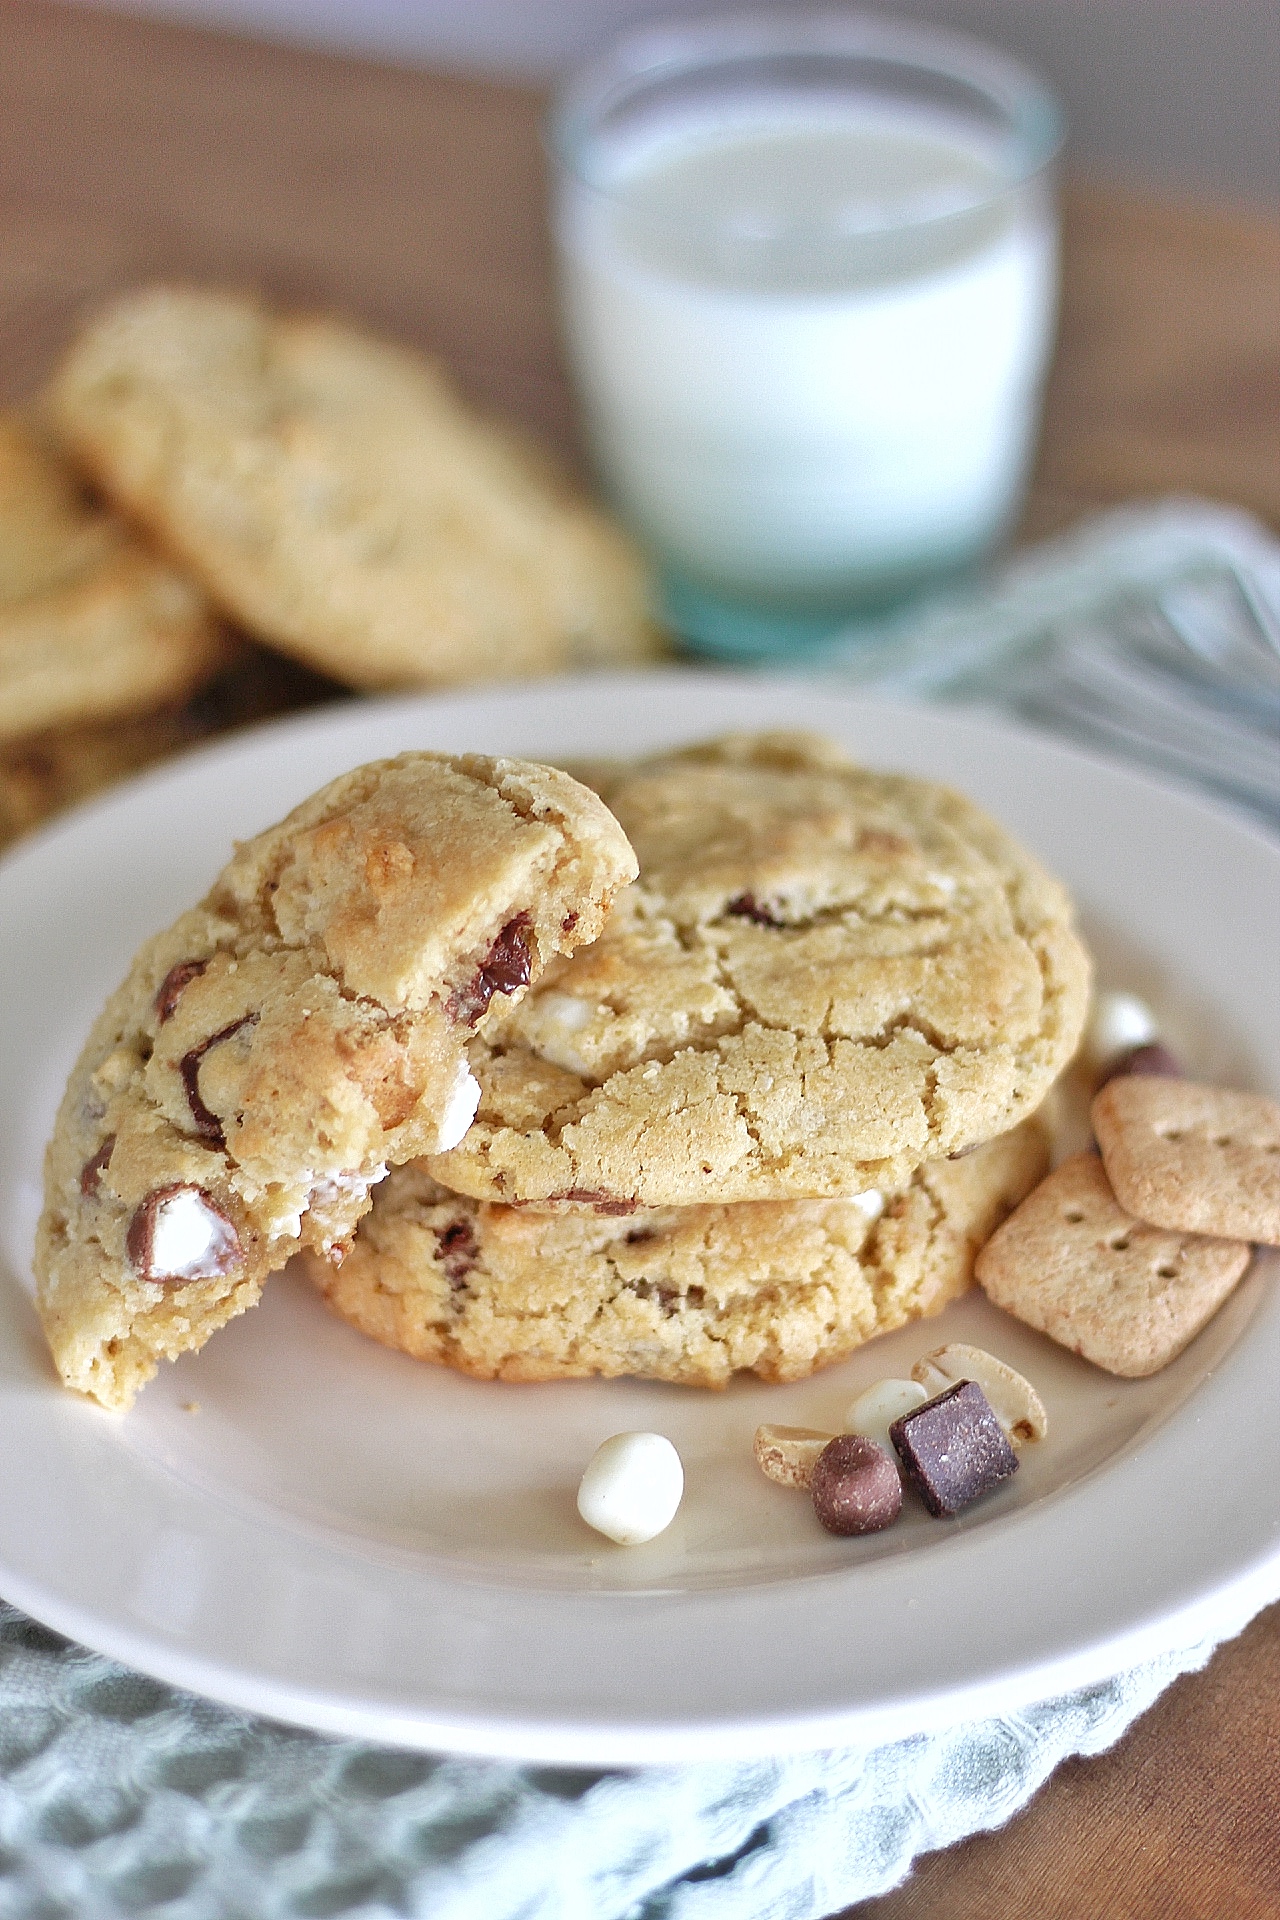 Brown Butter S'mores Cookies - delicious s'mores cookies made with brown butter and the #Target s'mores trail mix. #cakebycourtney #trailmix #smores #smorescookies #brownbuttercookies #brownbuttersmorescookies #cookierecipe #smorescookierecipe #cookies #easycookies